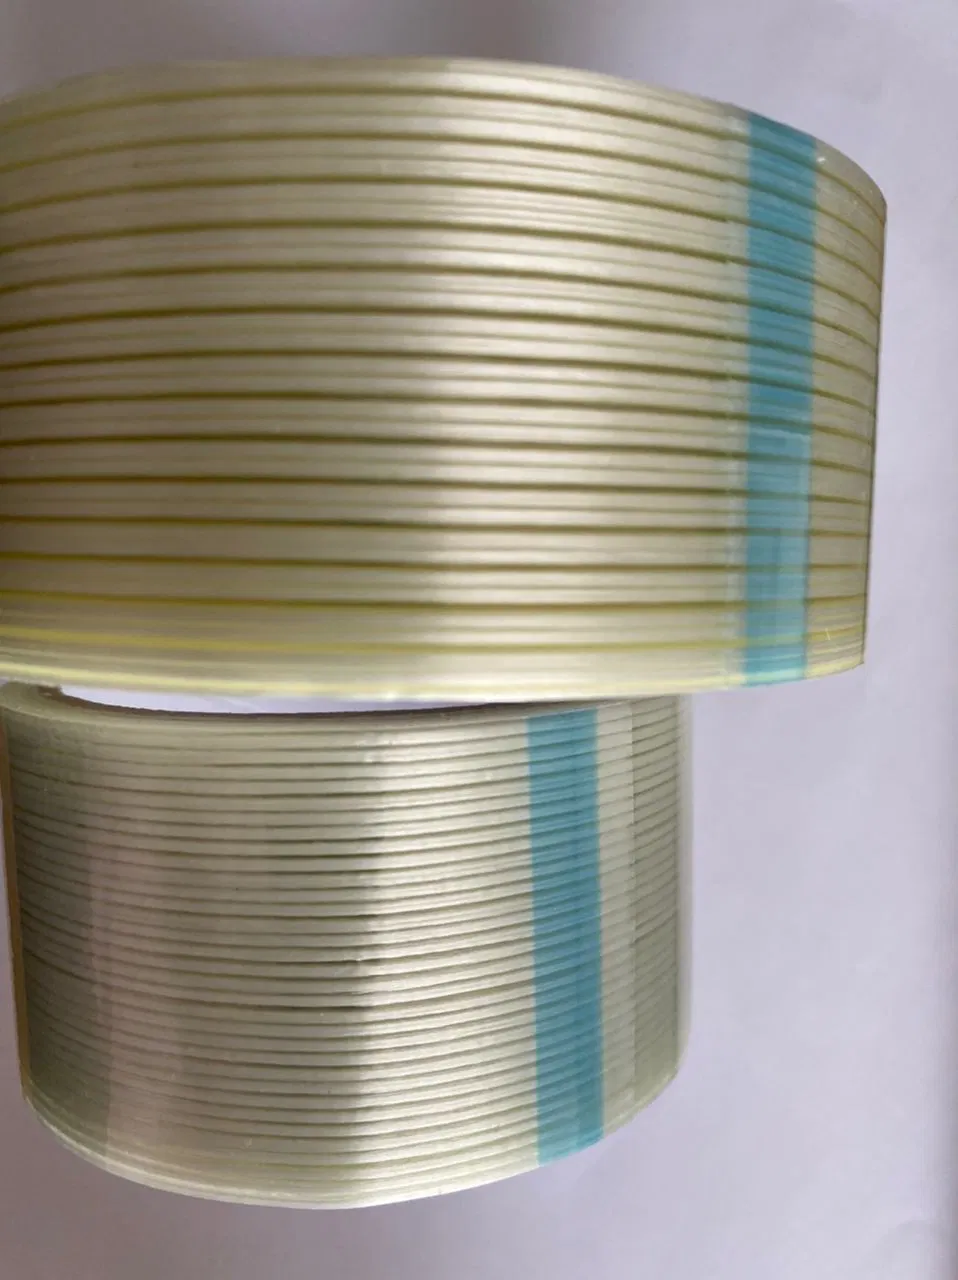 Unidirectional Fiberglass Filament Tape Used for Decorative Packaging of Metal and Wood